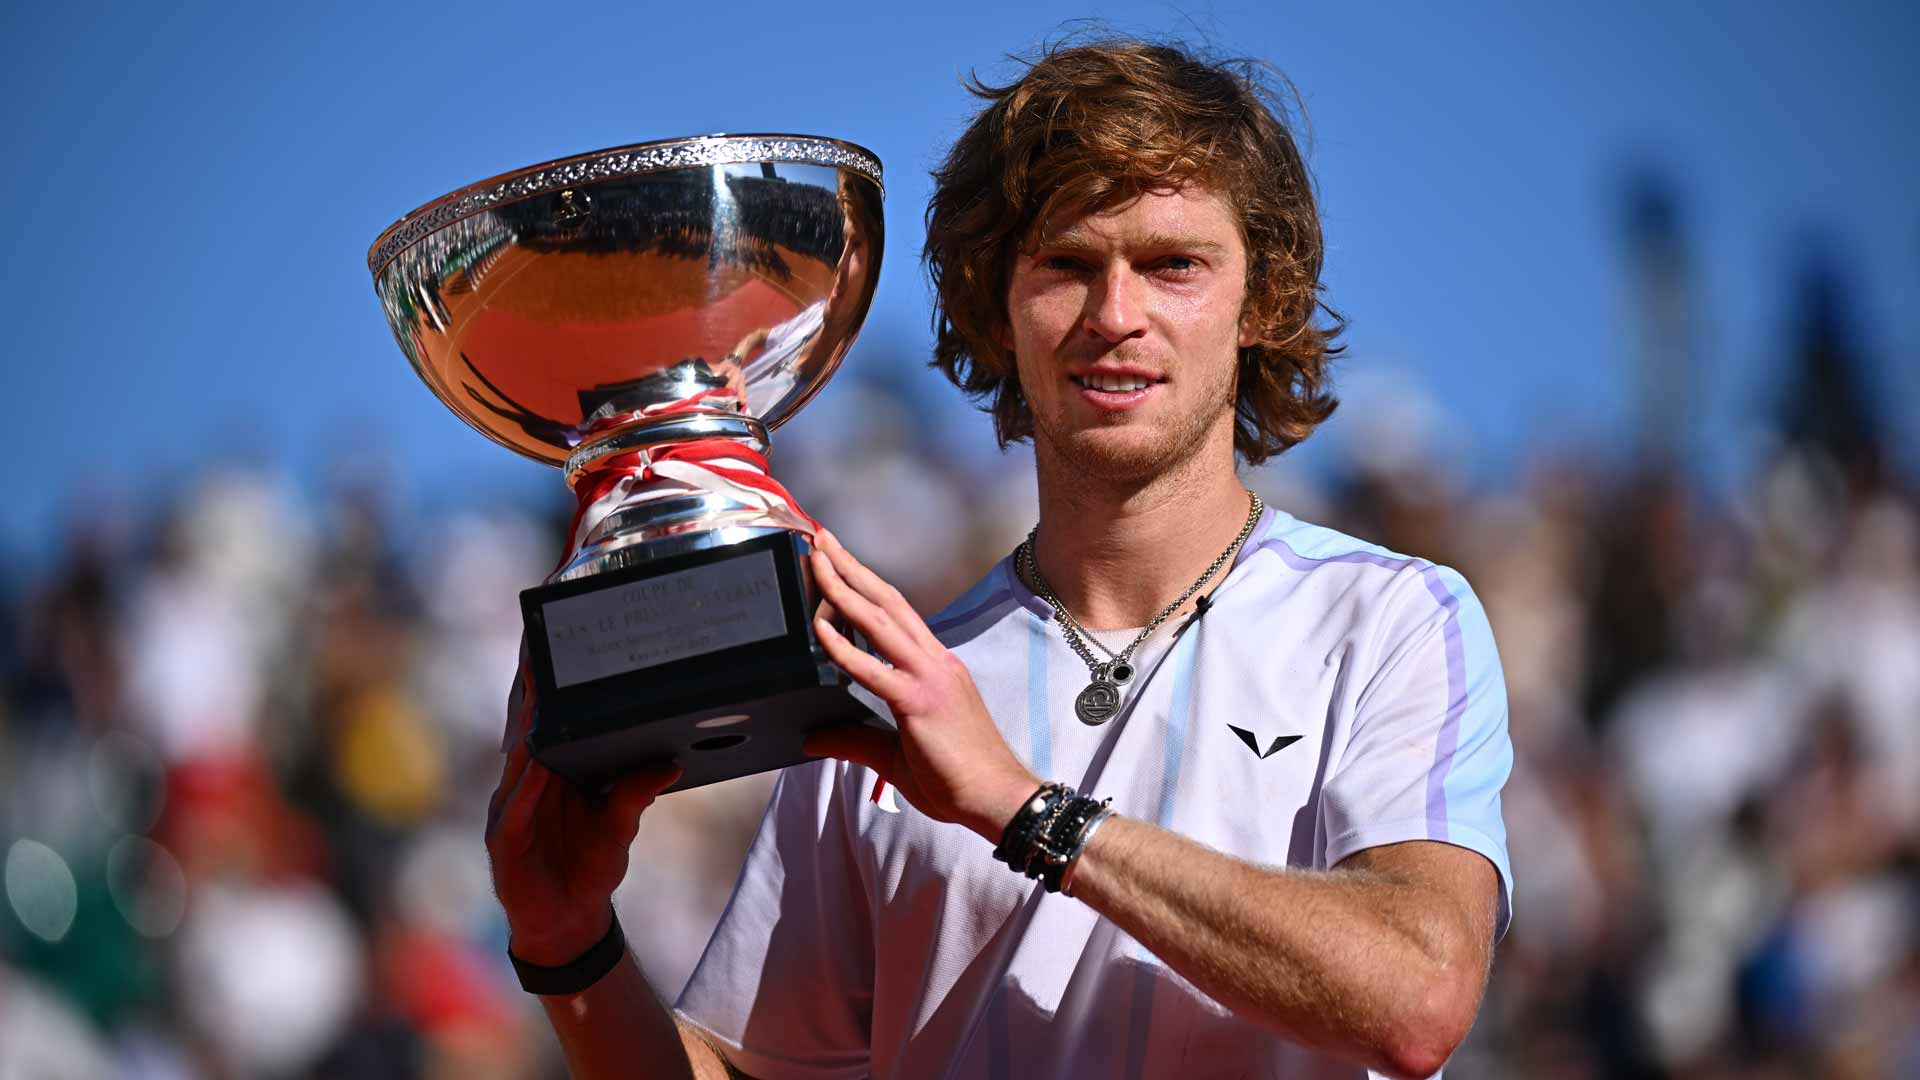 Andrey Rublev lifts his first ATP Masters 1000 trophy and his 13th overall on the ATP Tour.